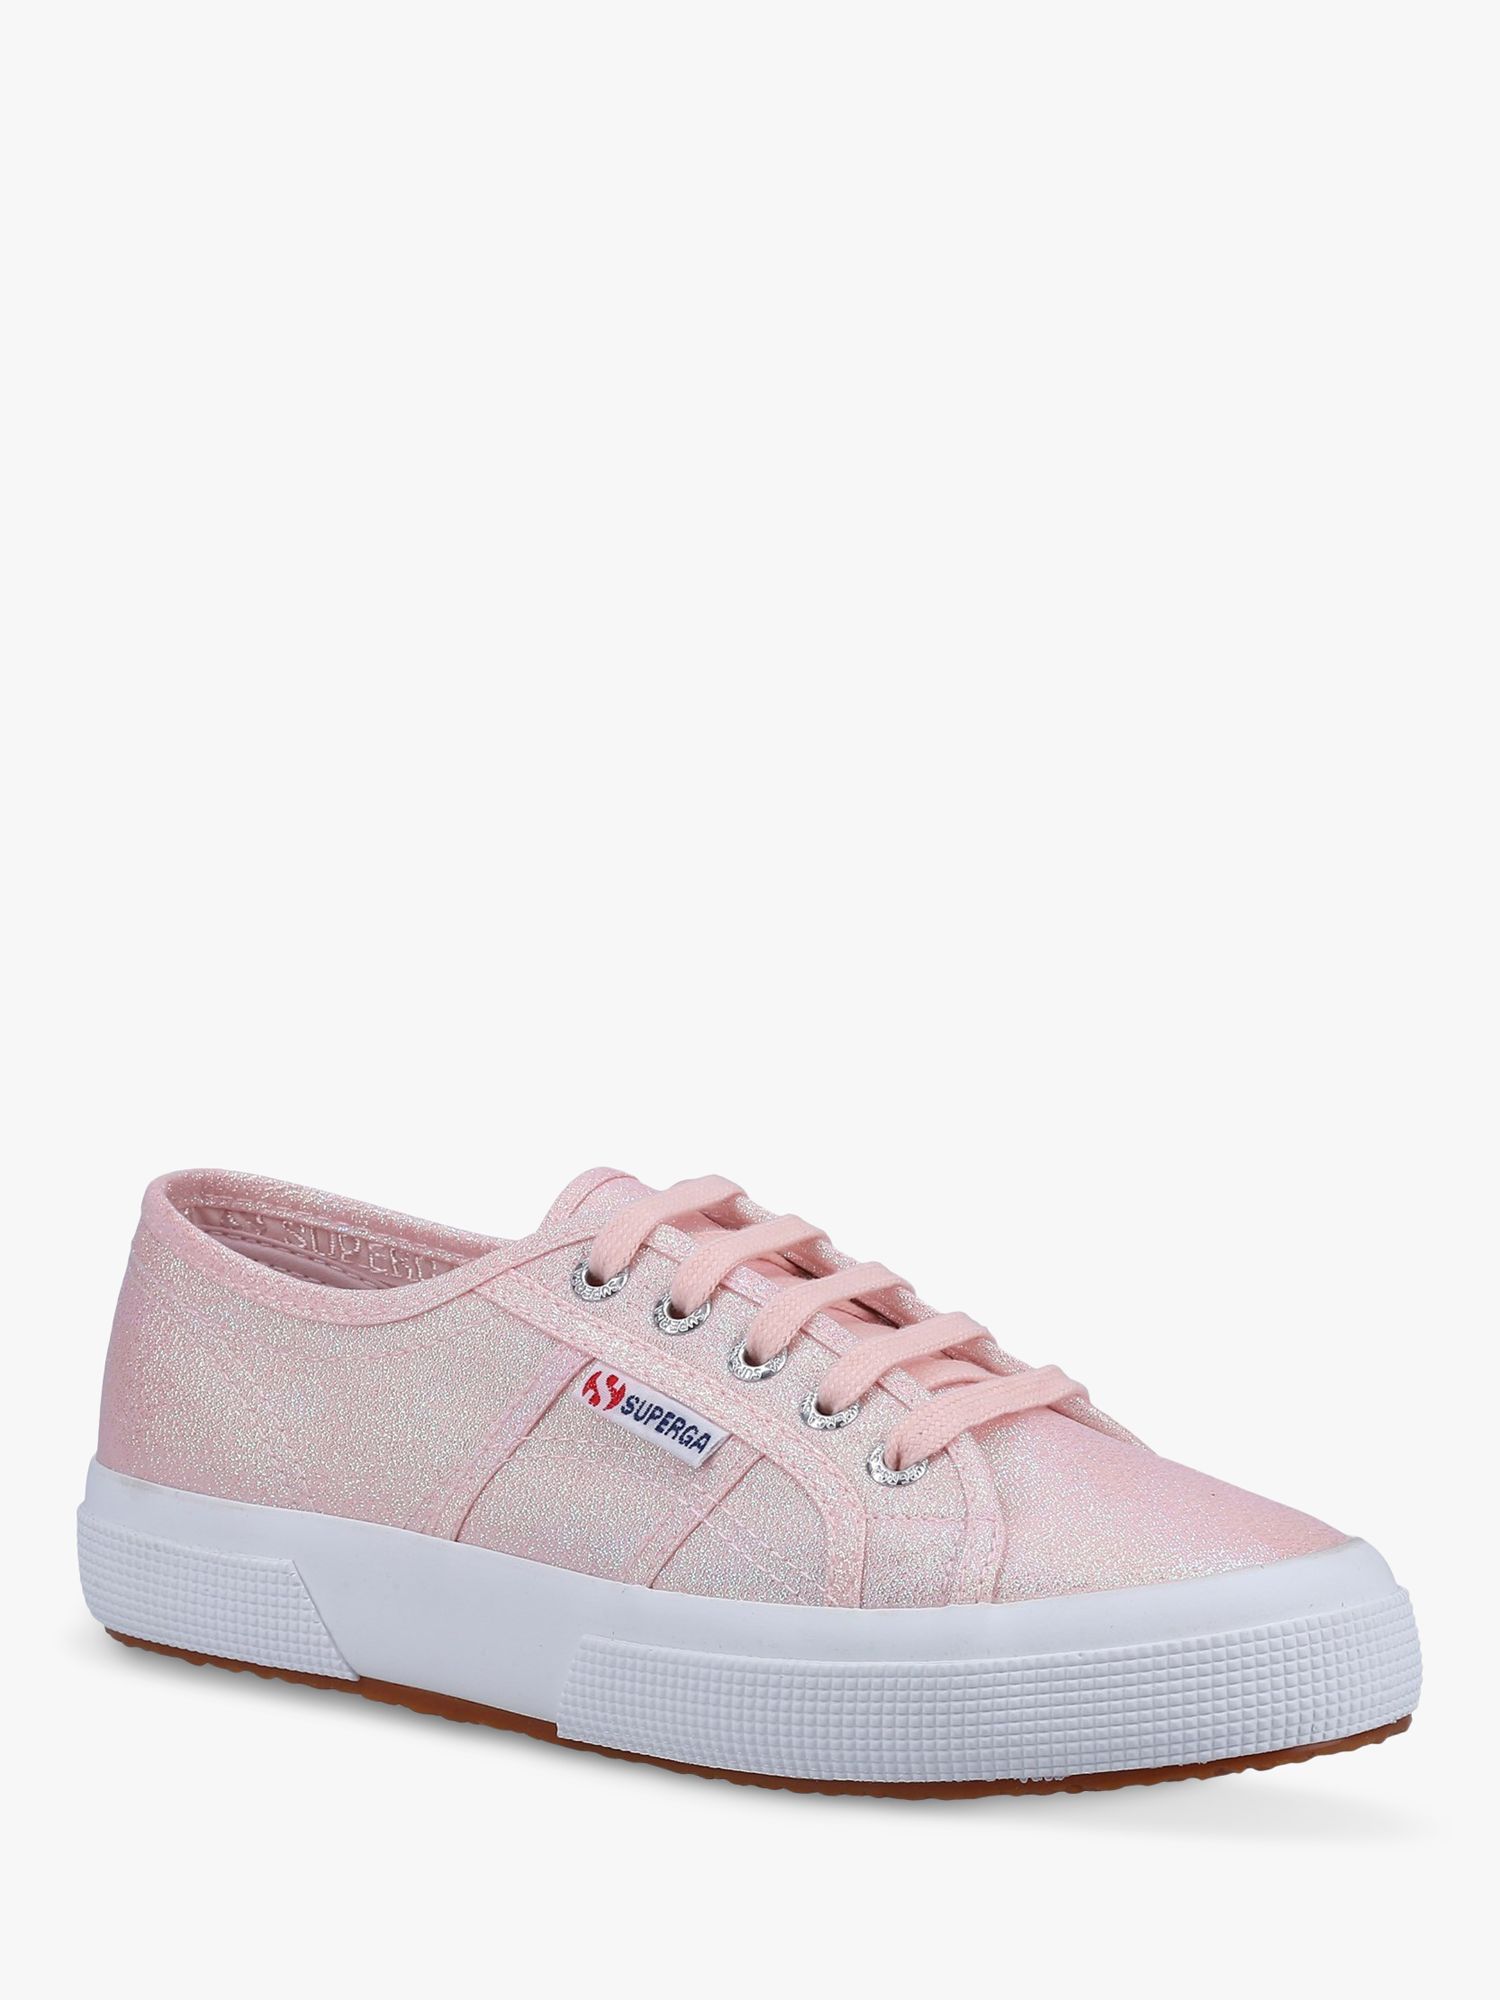 Buy Superga 2750 Lame Trainers Online at johnlewis.com